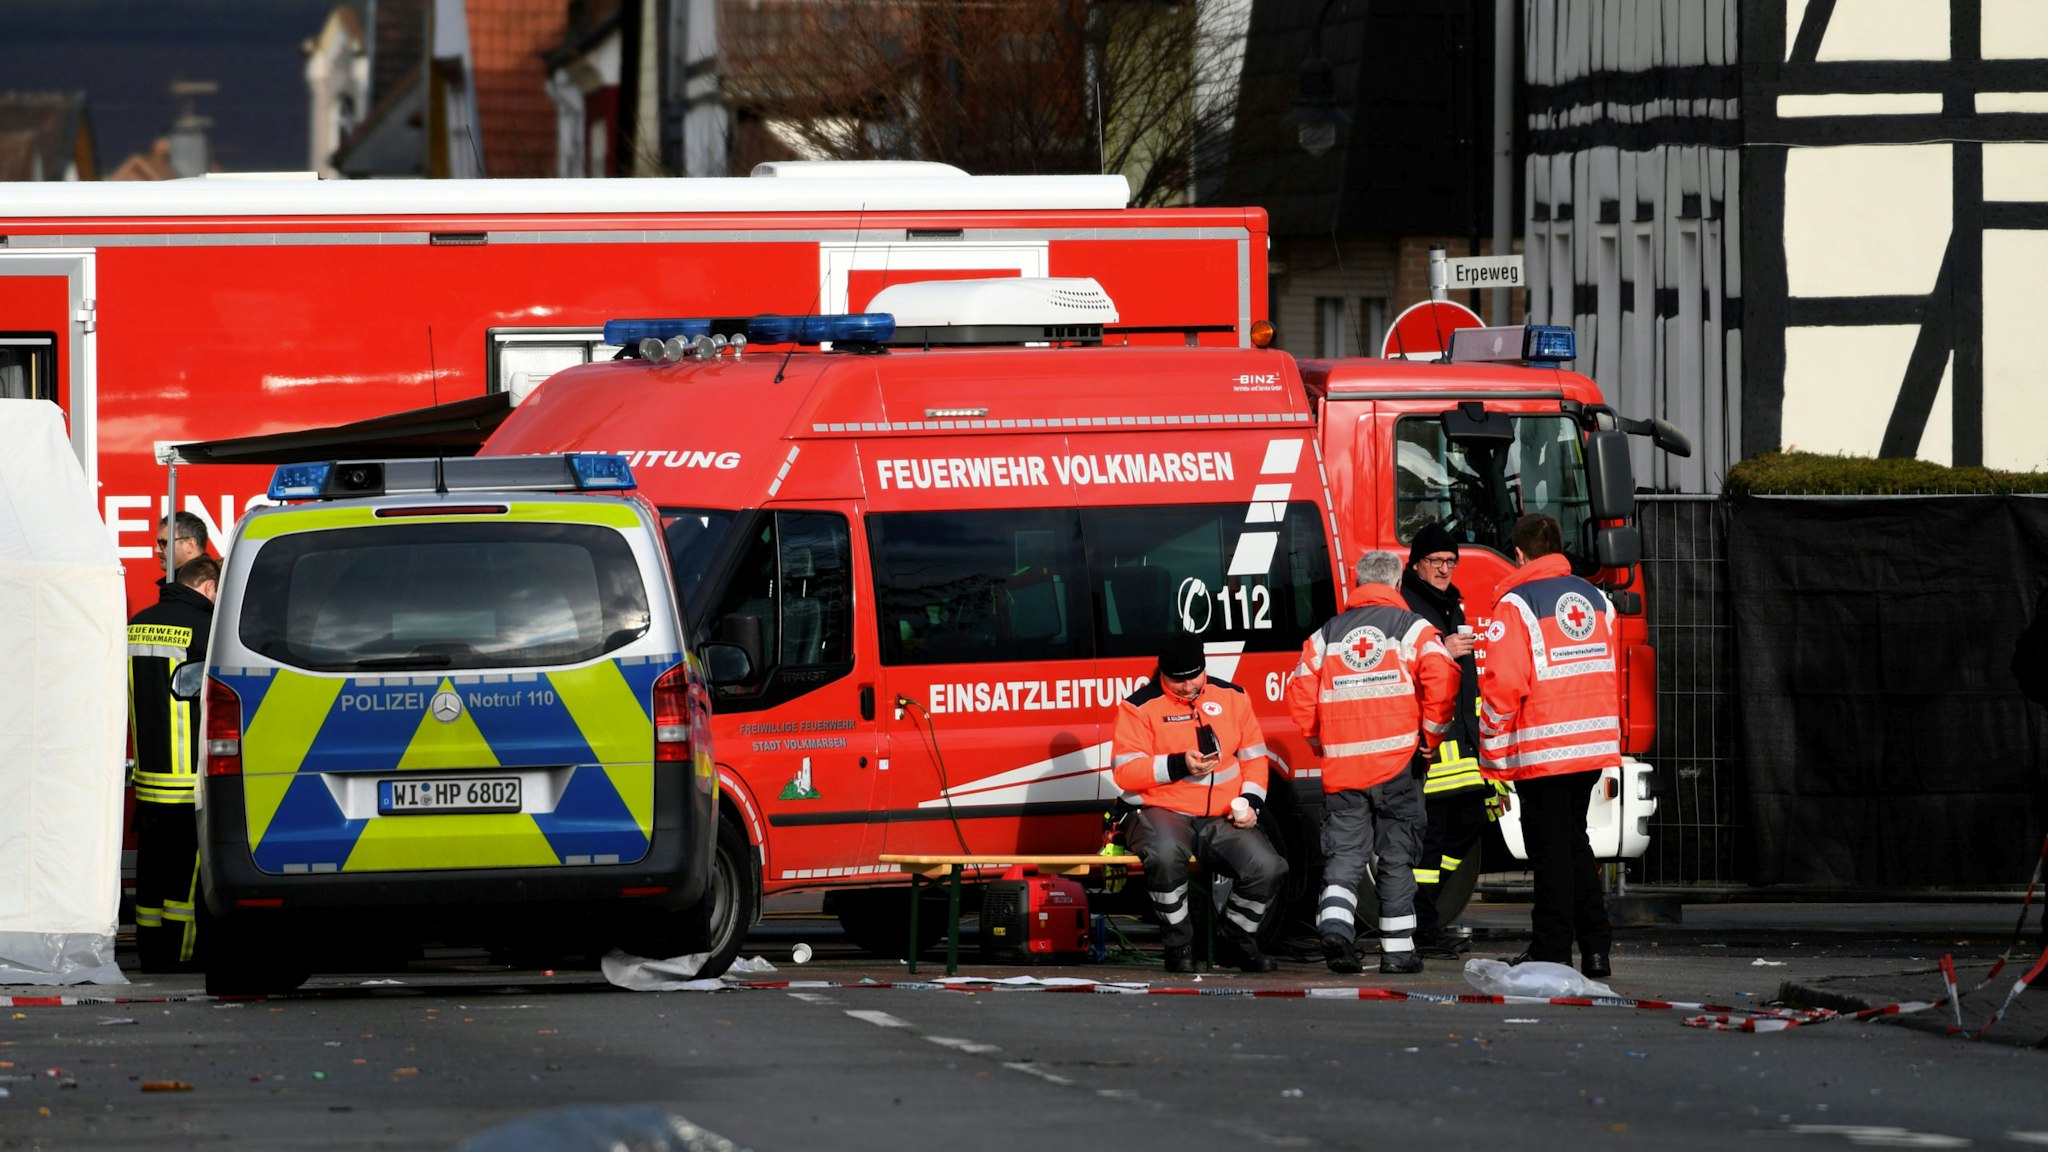 Vehicles of the police and the fire brigades stand at the site where a man who drove into a carnival procession, on February 25, 2020 in Volkmarsen near Kassel, central Germany. - A car that rammed into a carnival procession in Volkmarsen on Rose Monday, February 24, 2020, injured 52 people, including 18 children, police said, adding that the perpetrator's motive remains unclear.